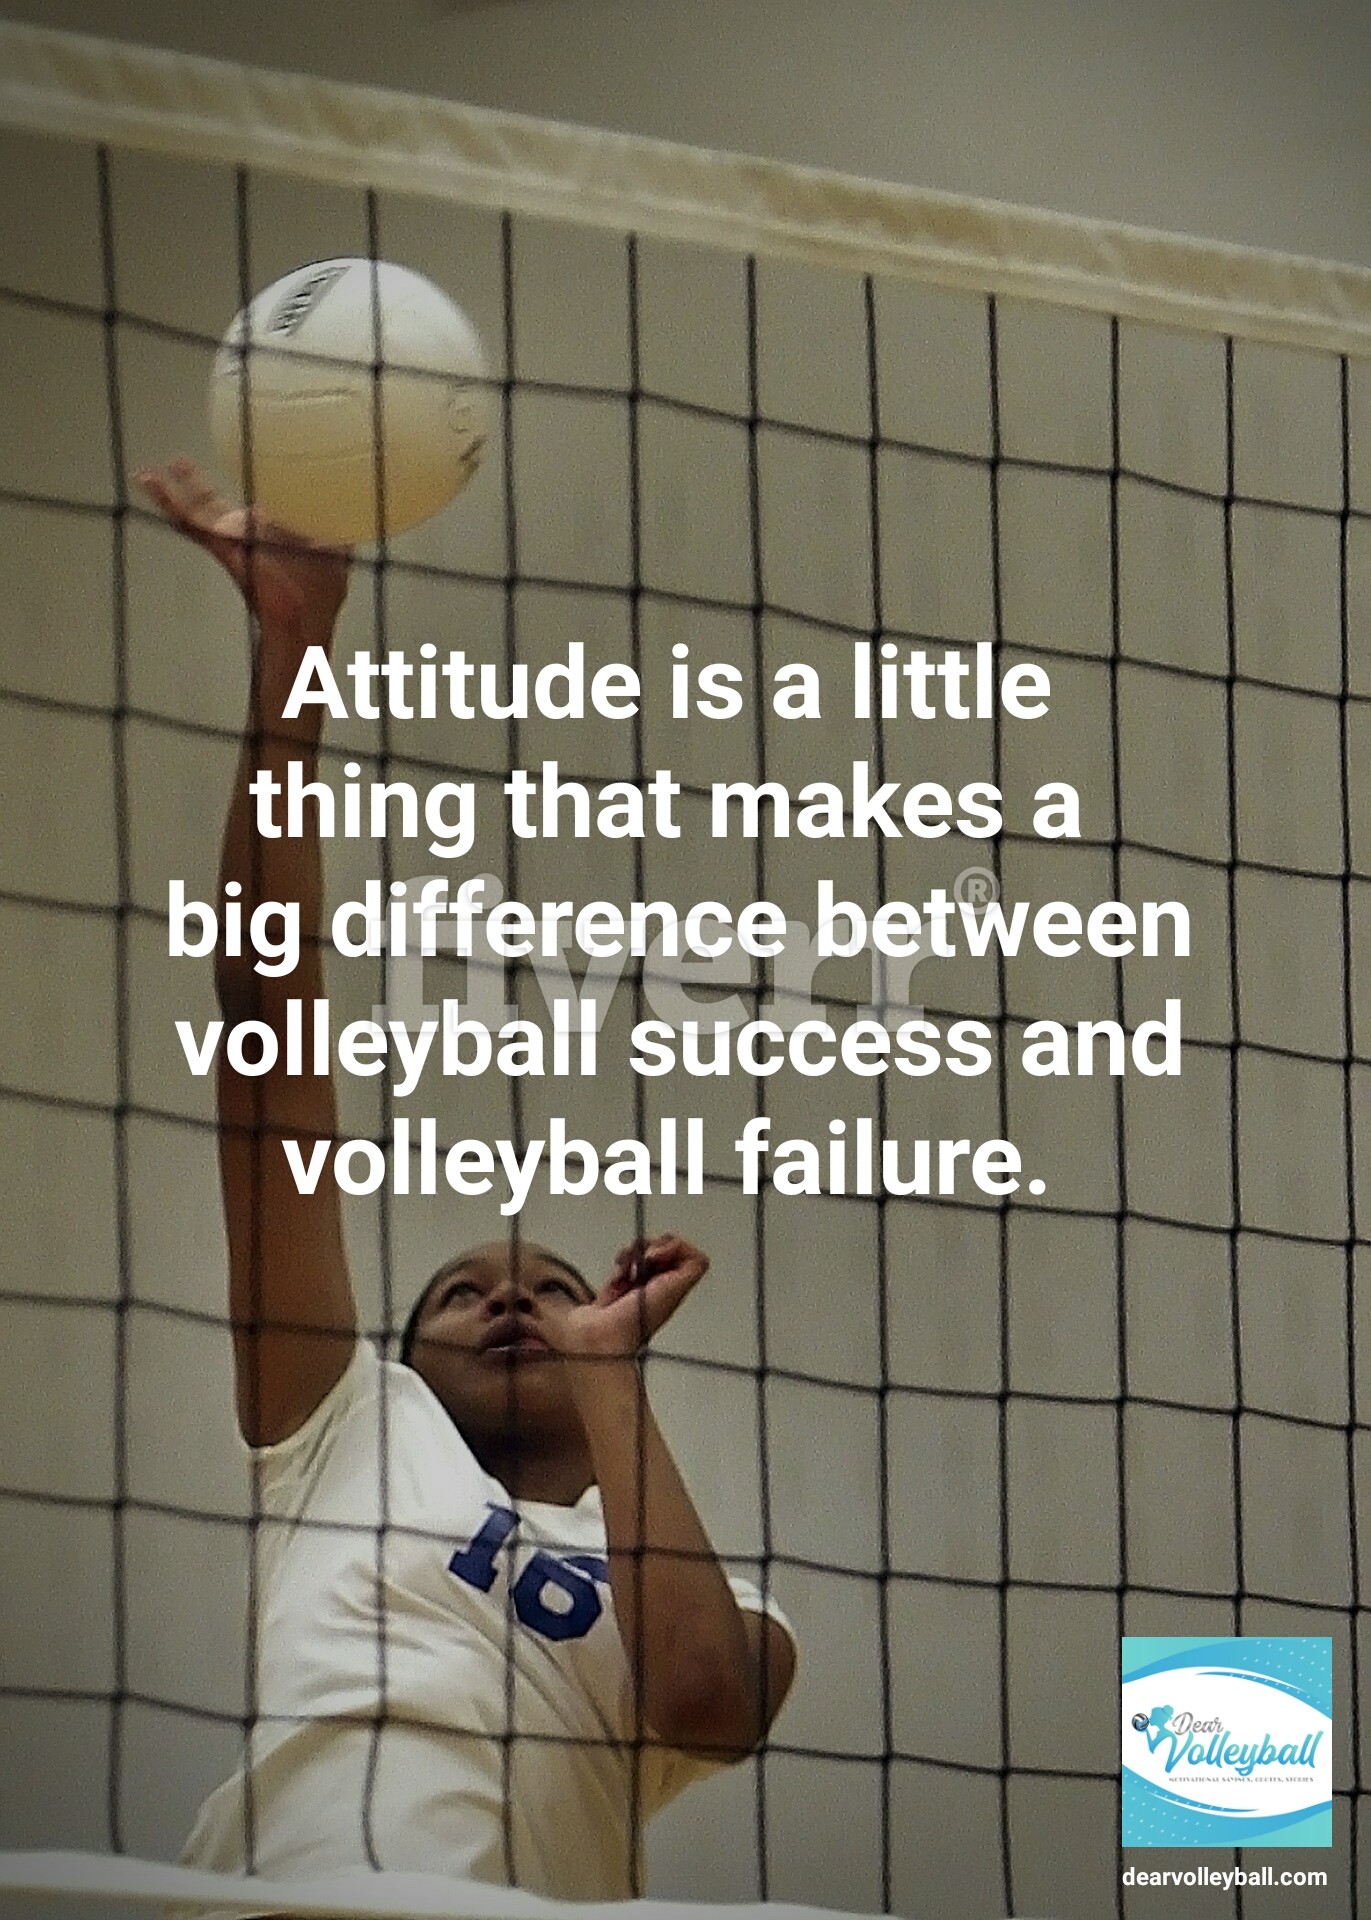 teamwork quotes for volleyball